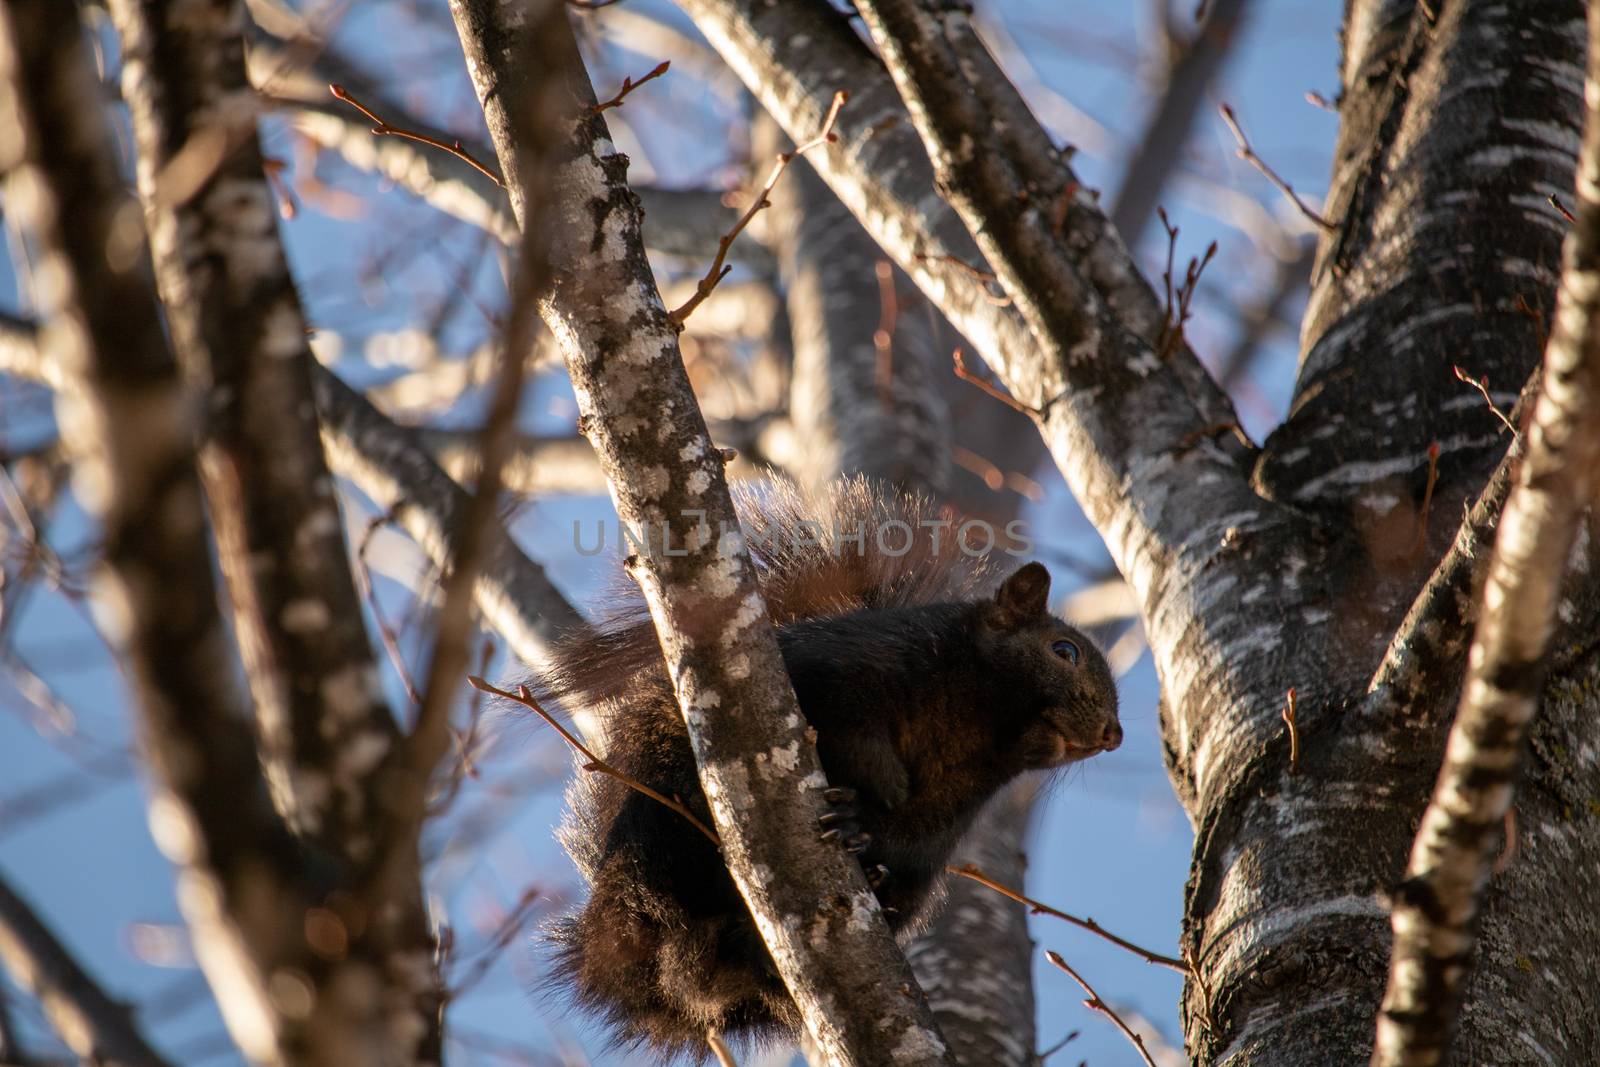 A black-colored eastern gray squirrel (Sciurus carolinensis) is perched on the branch of a tree and seen from below.